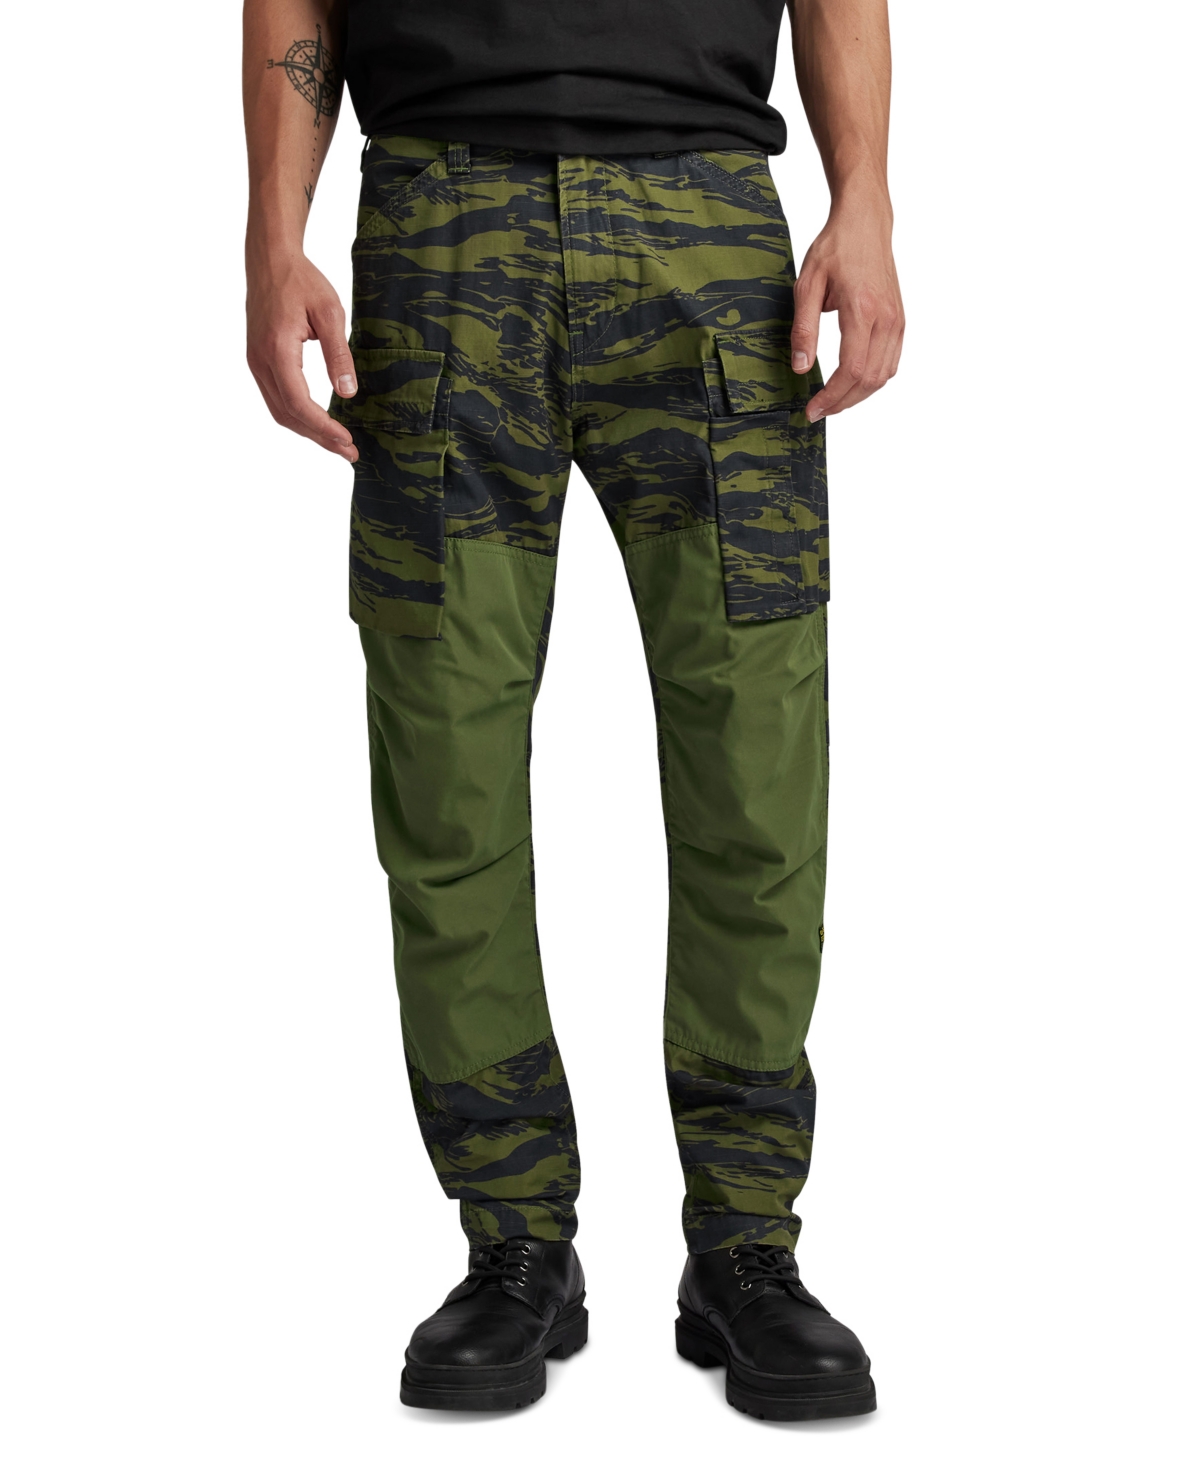 Men's Tapered Camo Cargo Pants - Shadow Olive L Tiger Camo